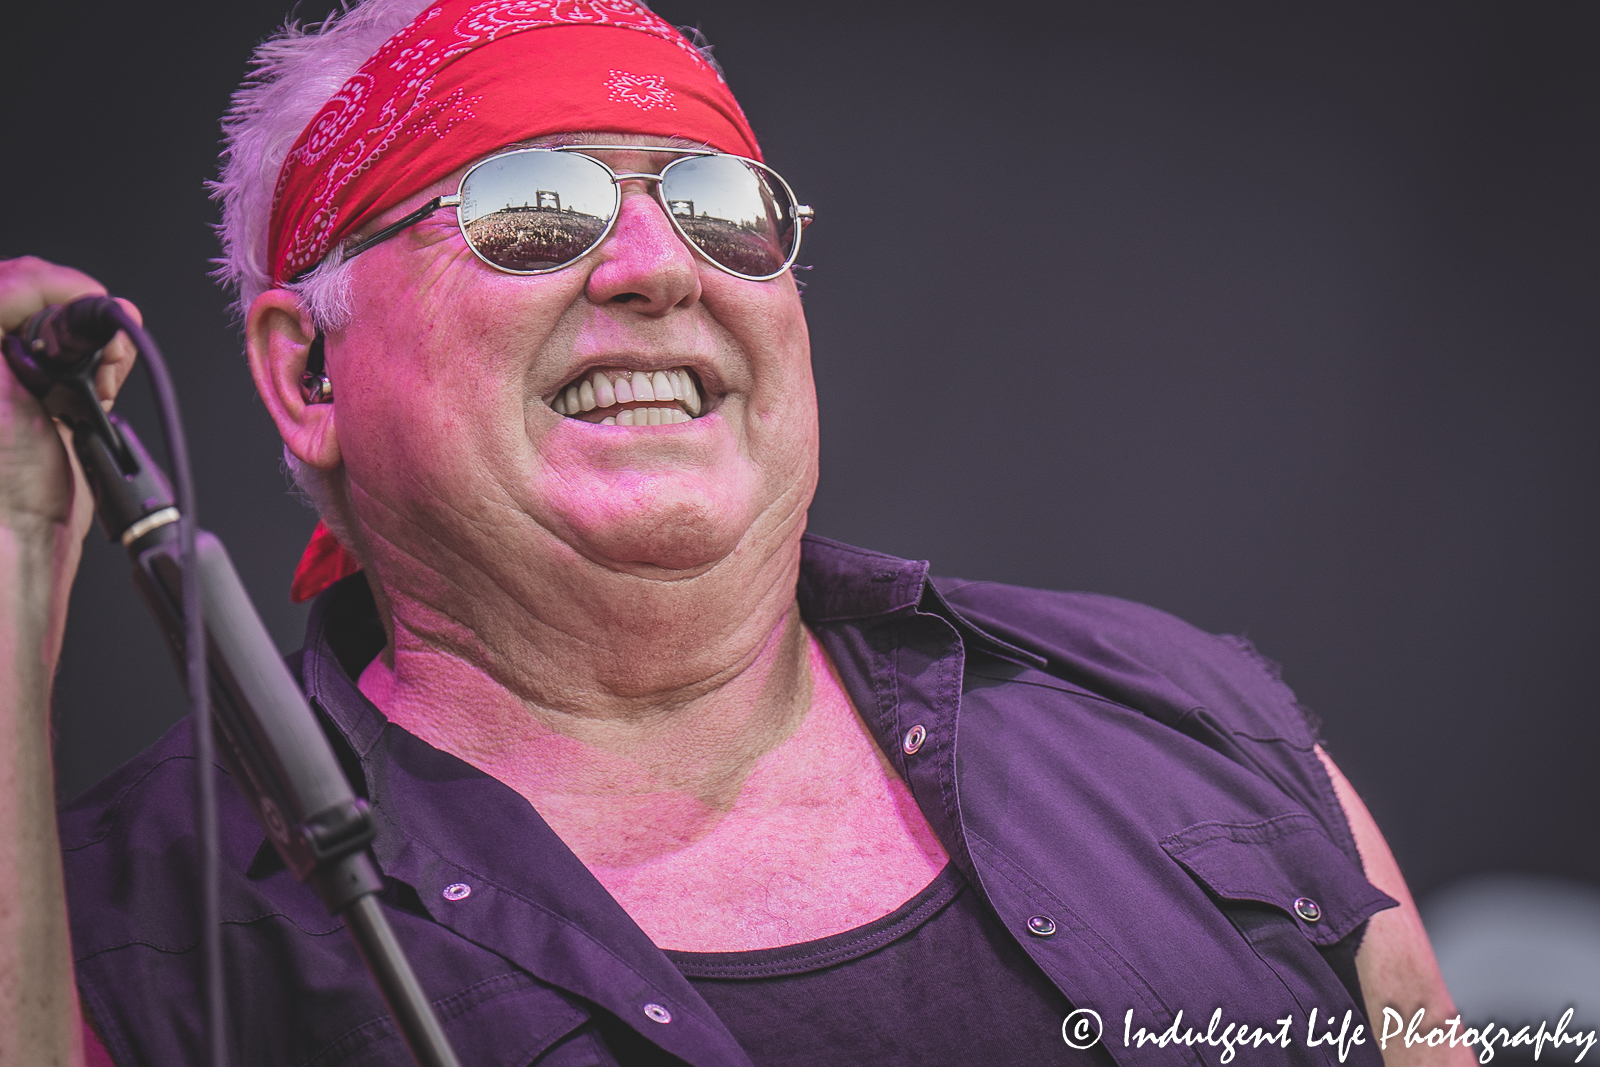 Frontman Mike Reno of Loverboy live in concert at Starlight Theatre in Kansas City, MO on June 14, 2022.